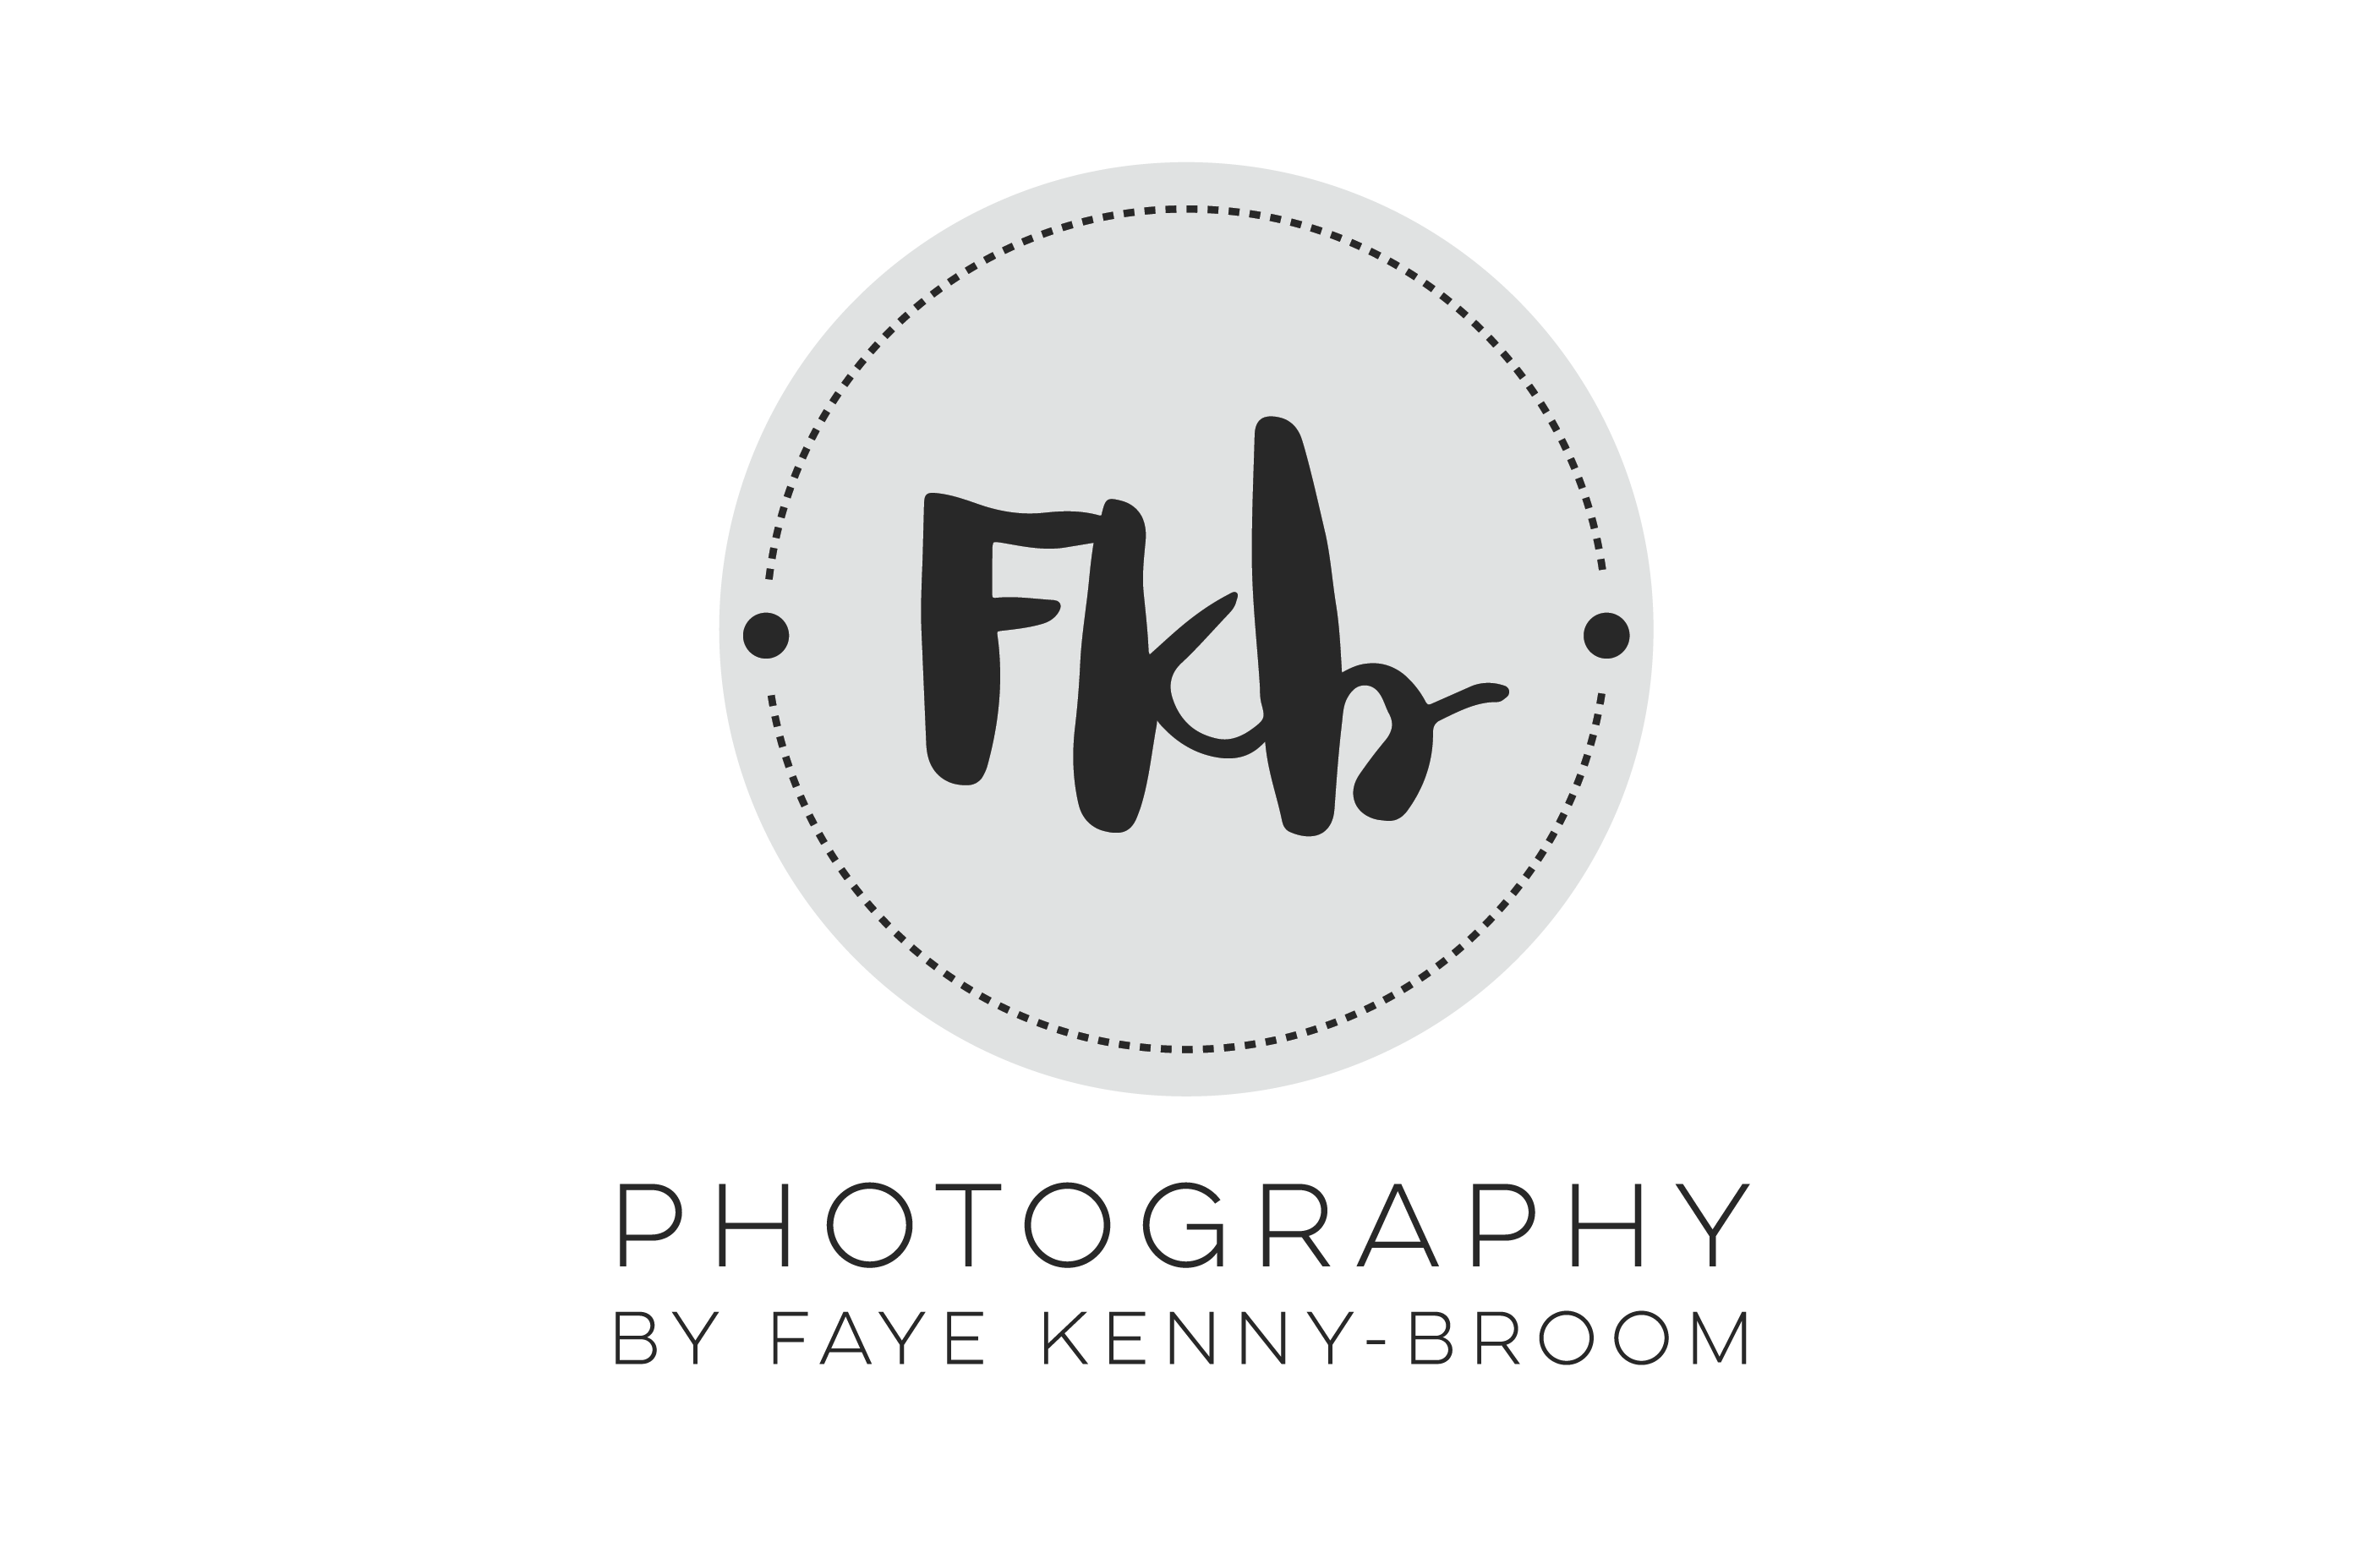 Photography by Faye Kenny-Broom